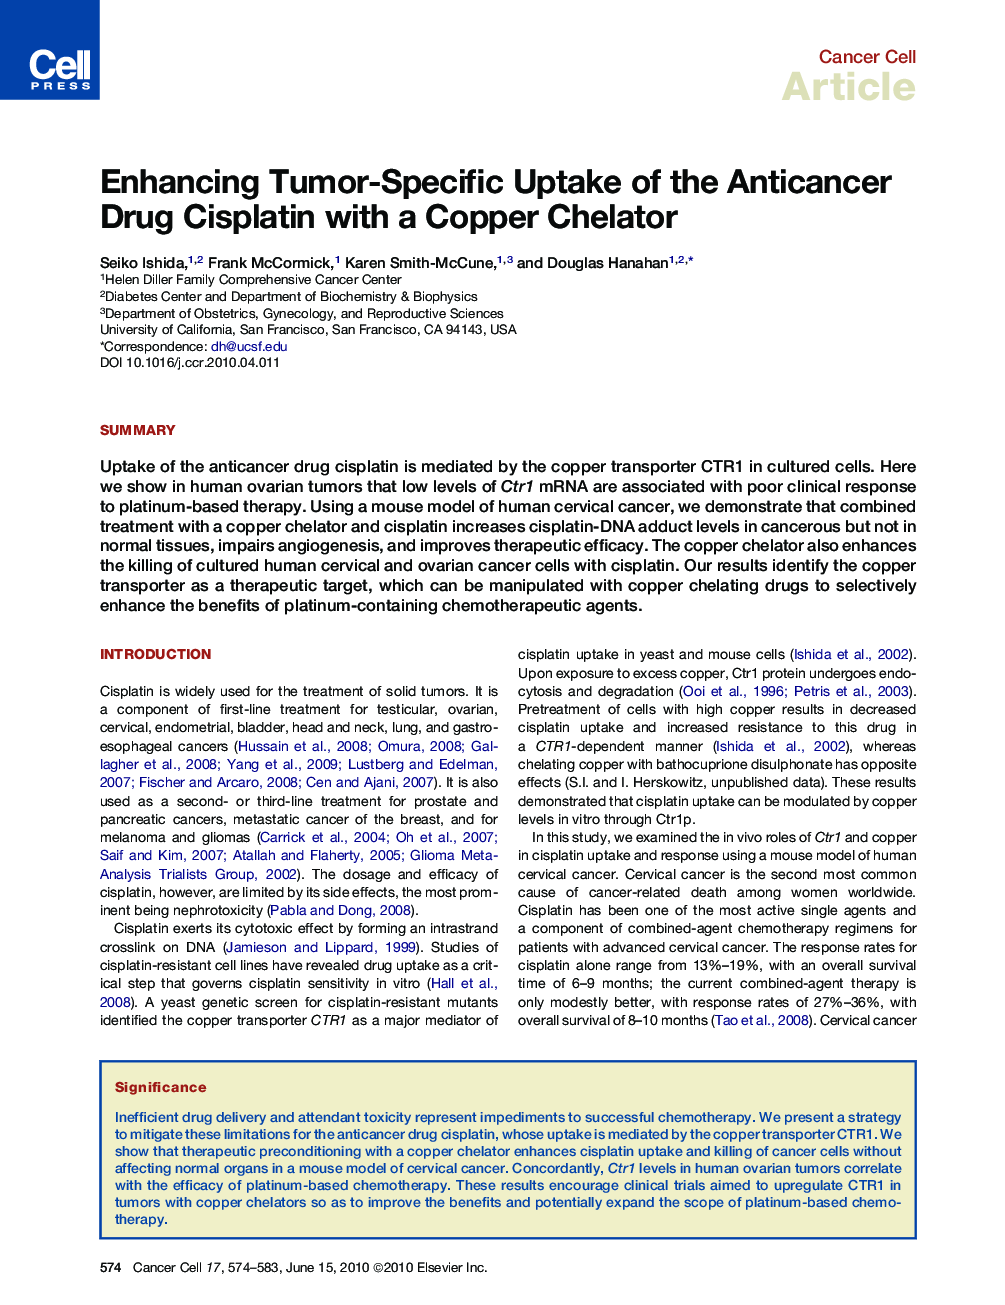 Enhancing Tumor-Specific Uptake of the Anticancer Drug Cisplatin with a Copper Chelator